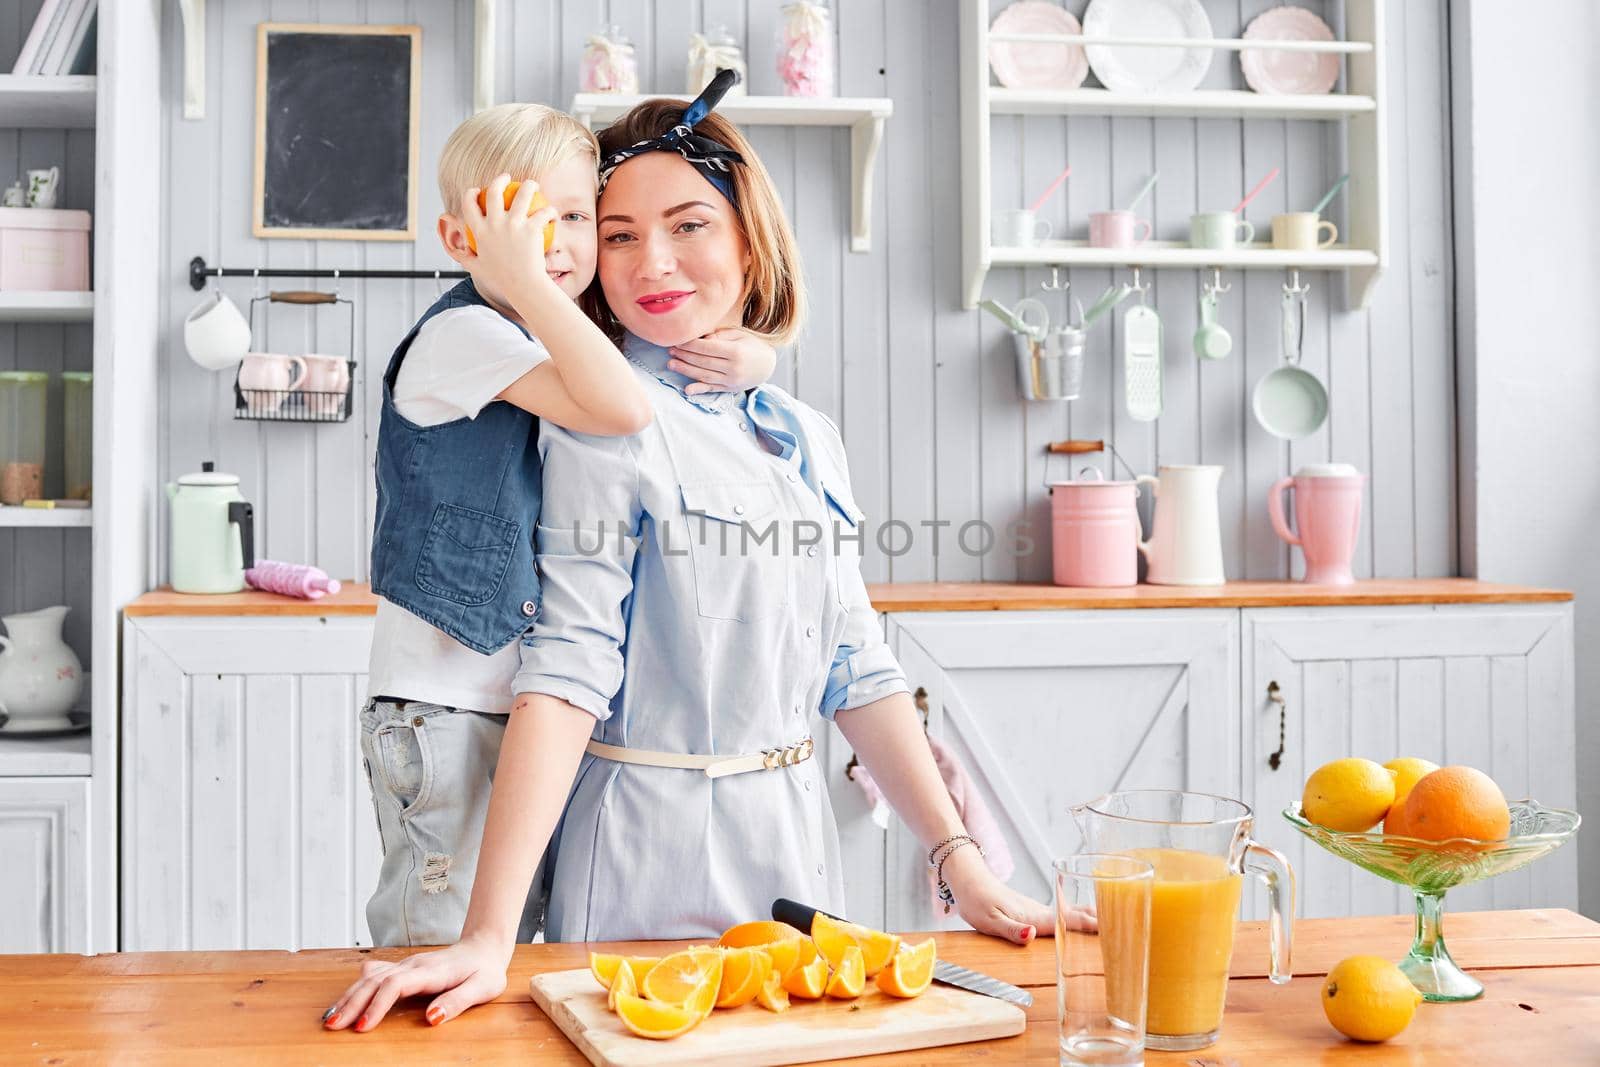 Healthy food, fresh fruit, juicy oranges. Mother and son are smiling while having a breakfast in kitchen. Bright morning in the kitchen